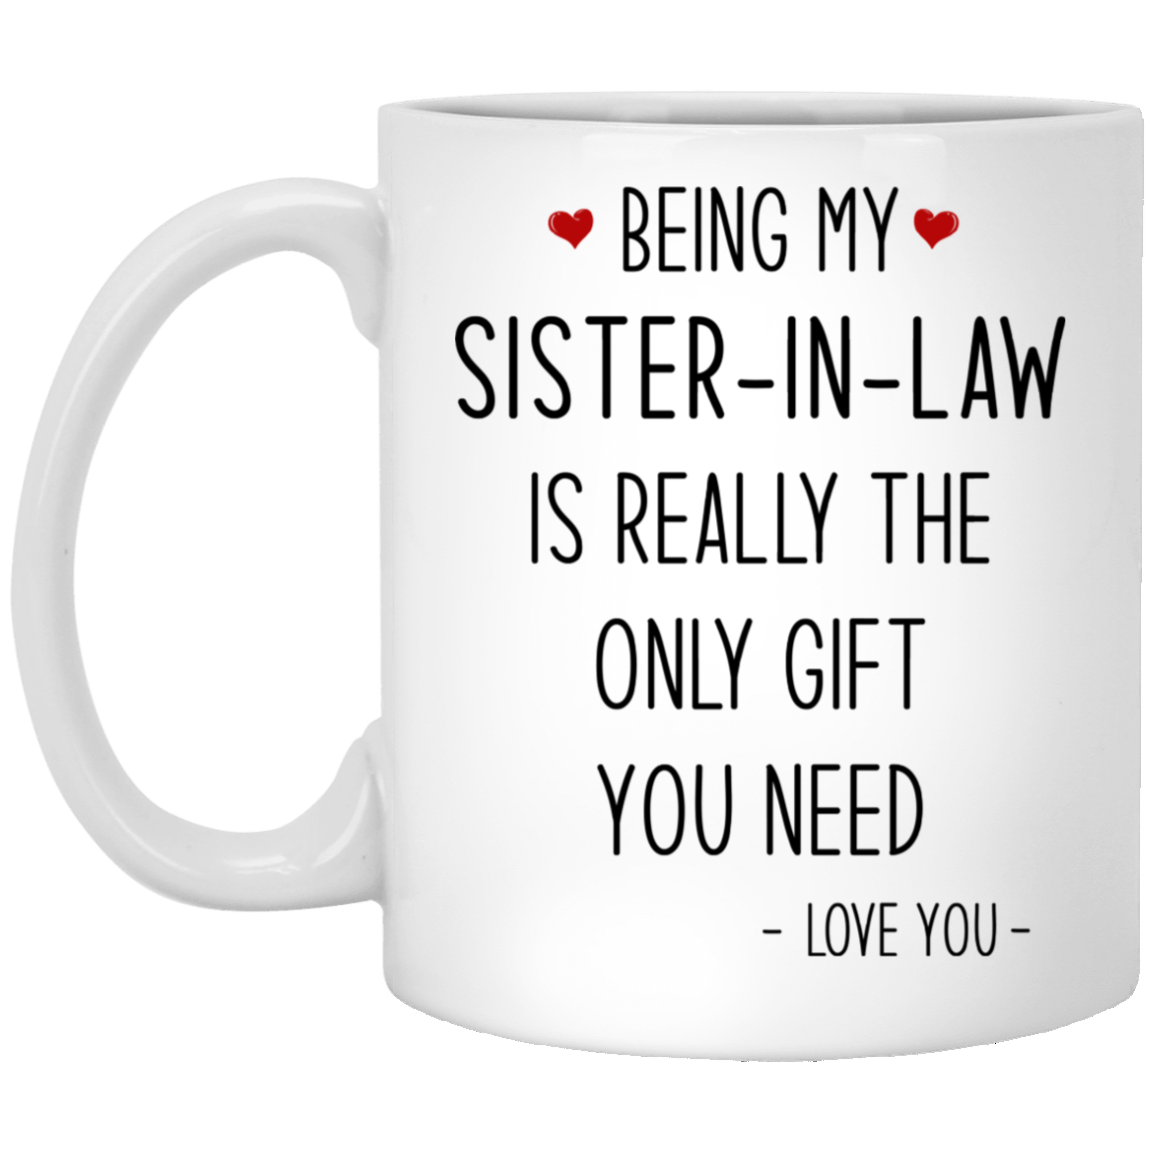 Sister-In-Law Mugs Collection Archives - The Improper Mug